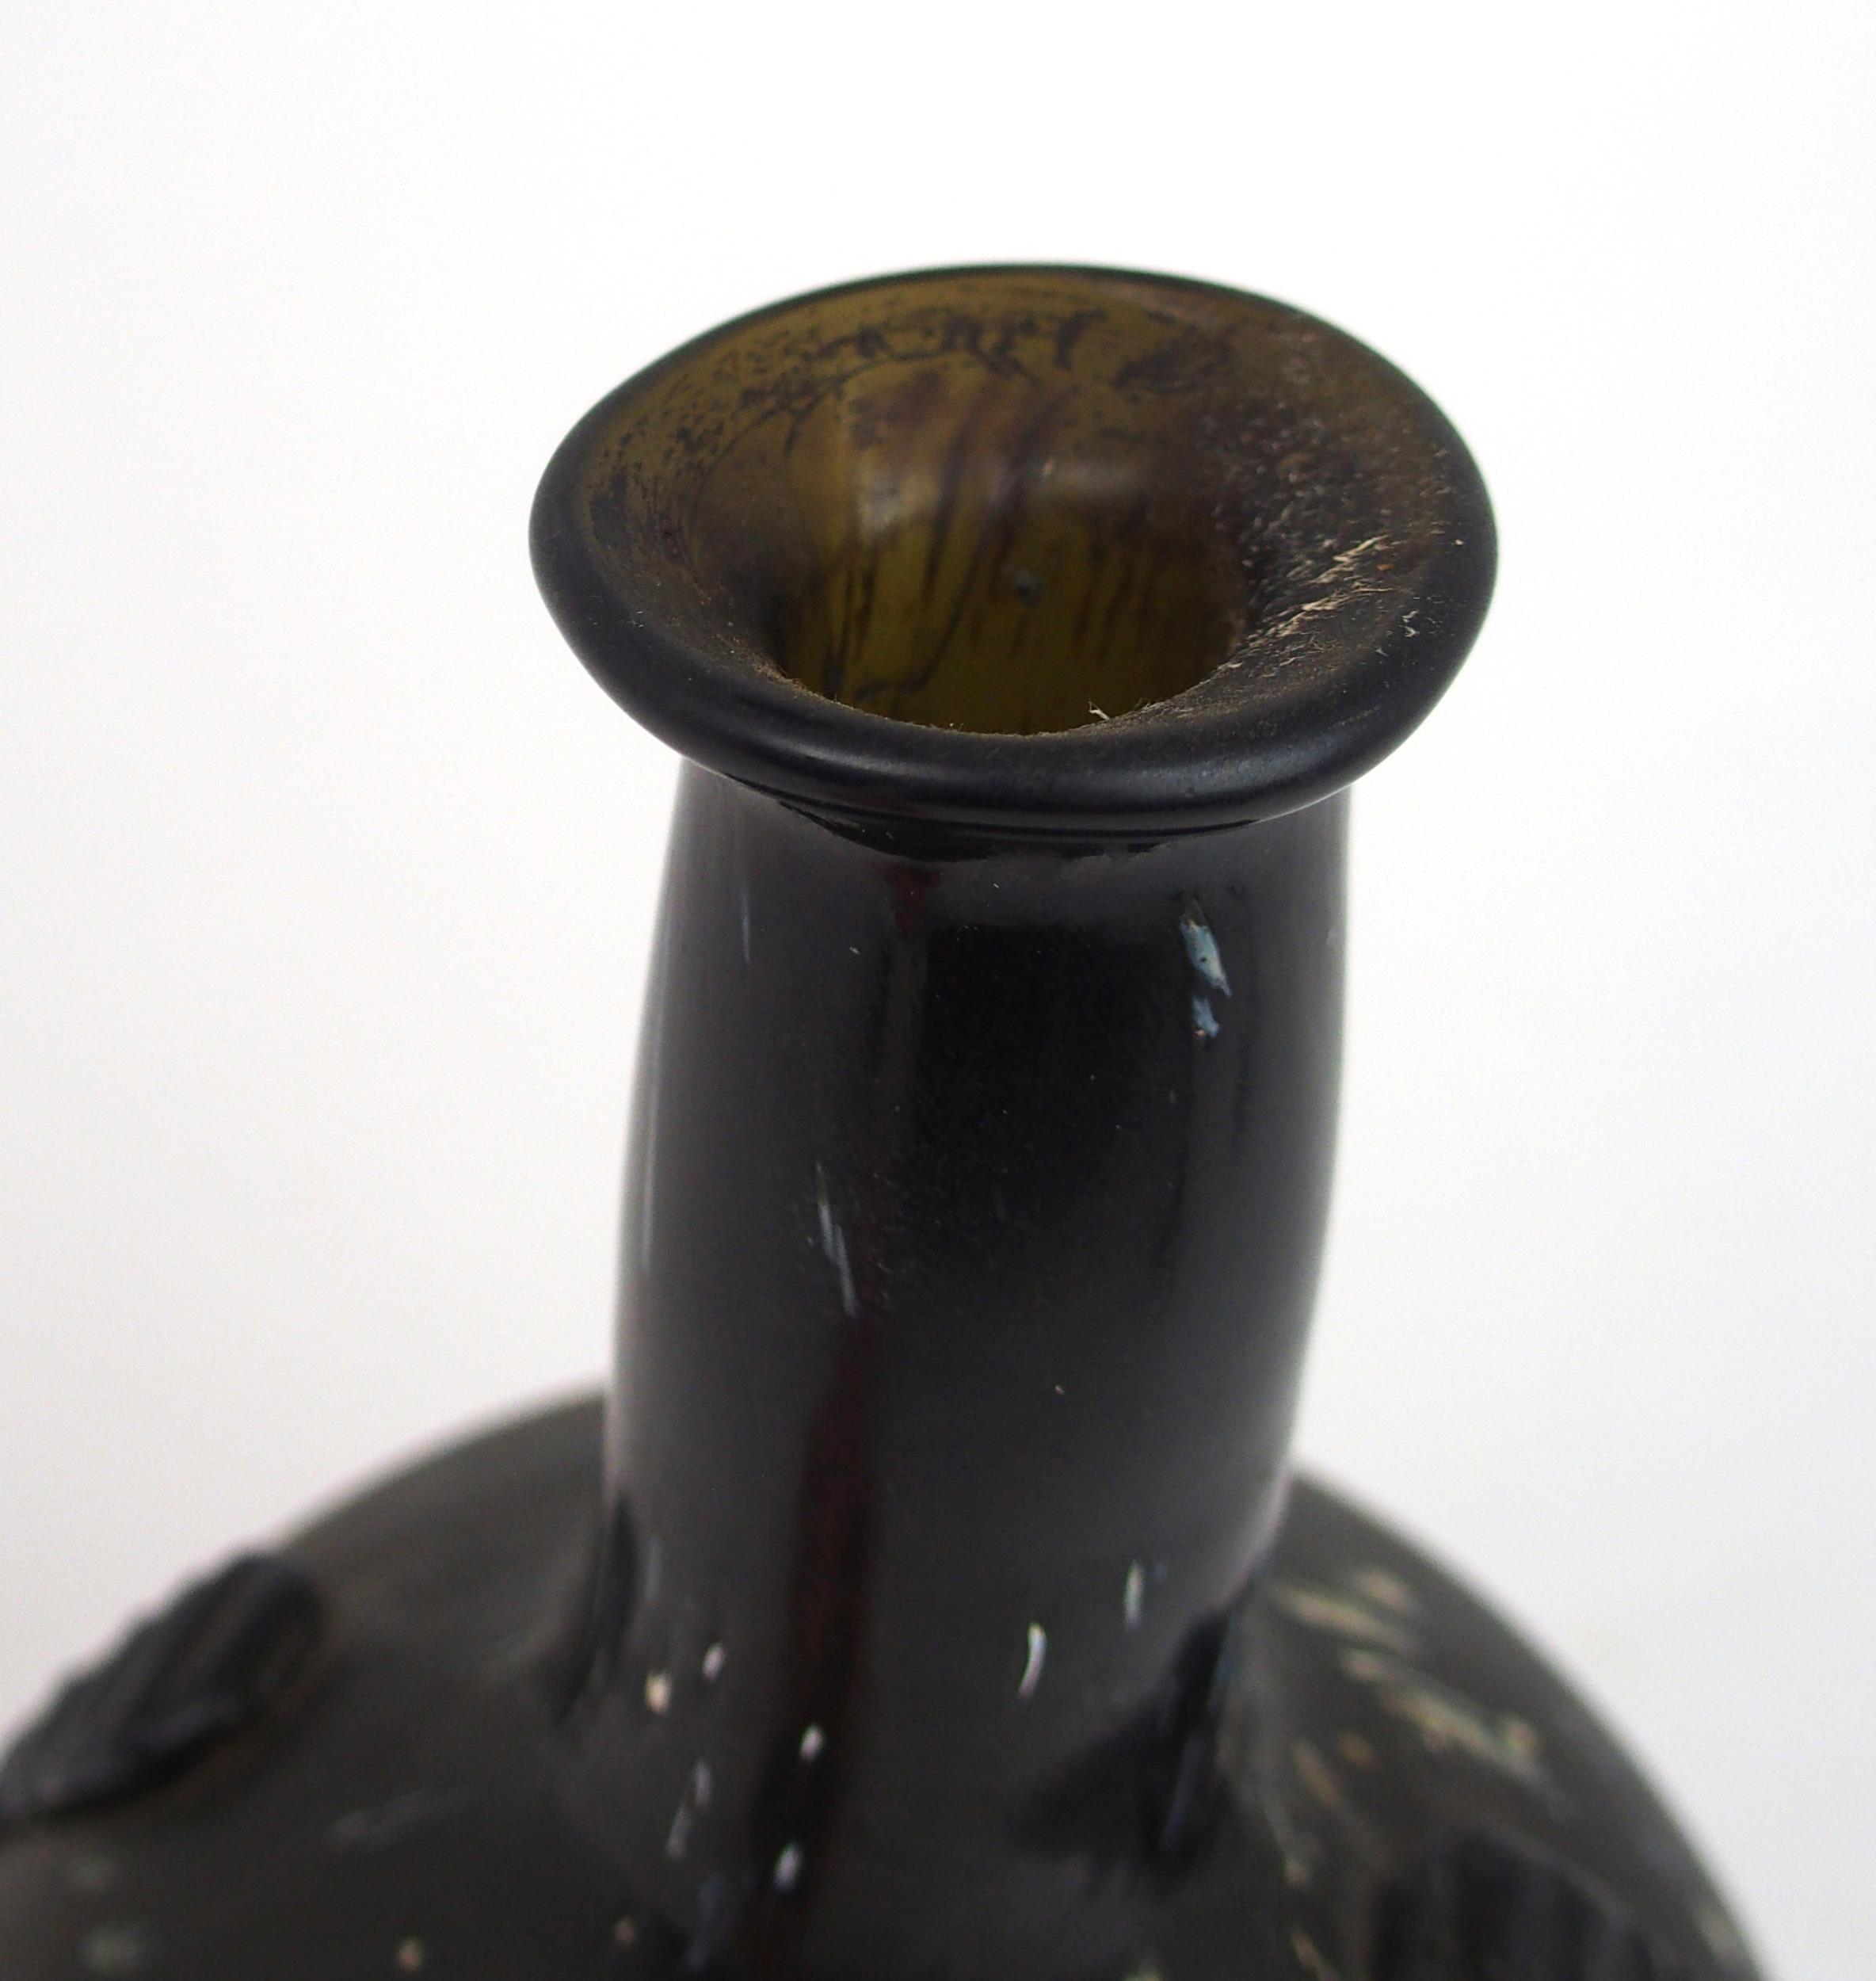 AN EARLY 19TH CENTURY ALLOA GLASS WINE BOTTLE in dark olive green mottled with white splashes, - Image 6 of 7